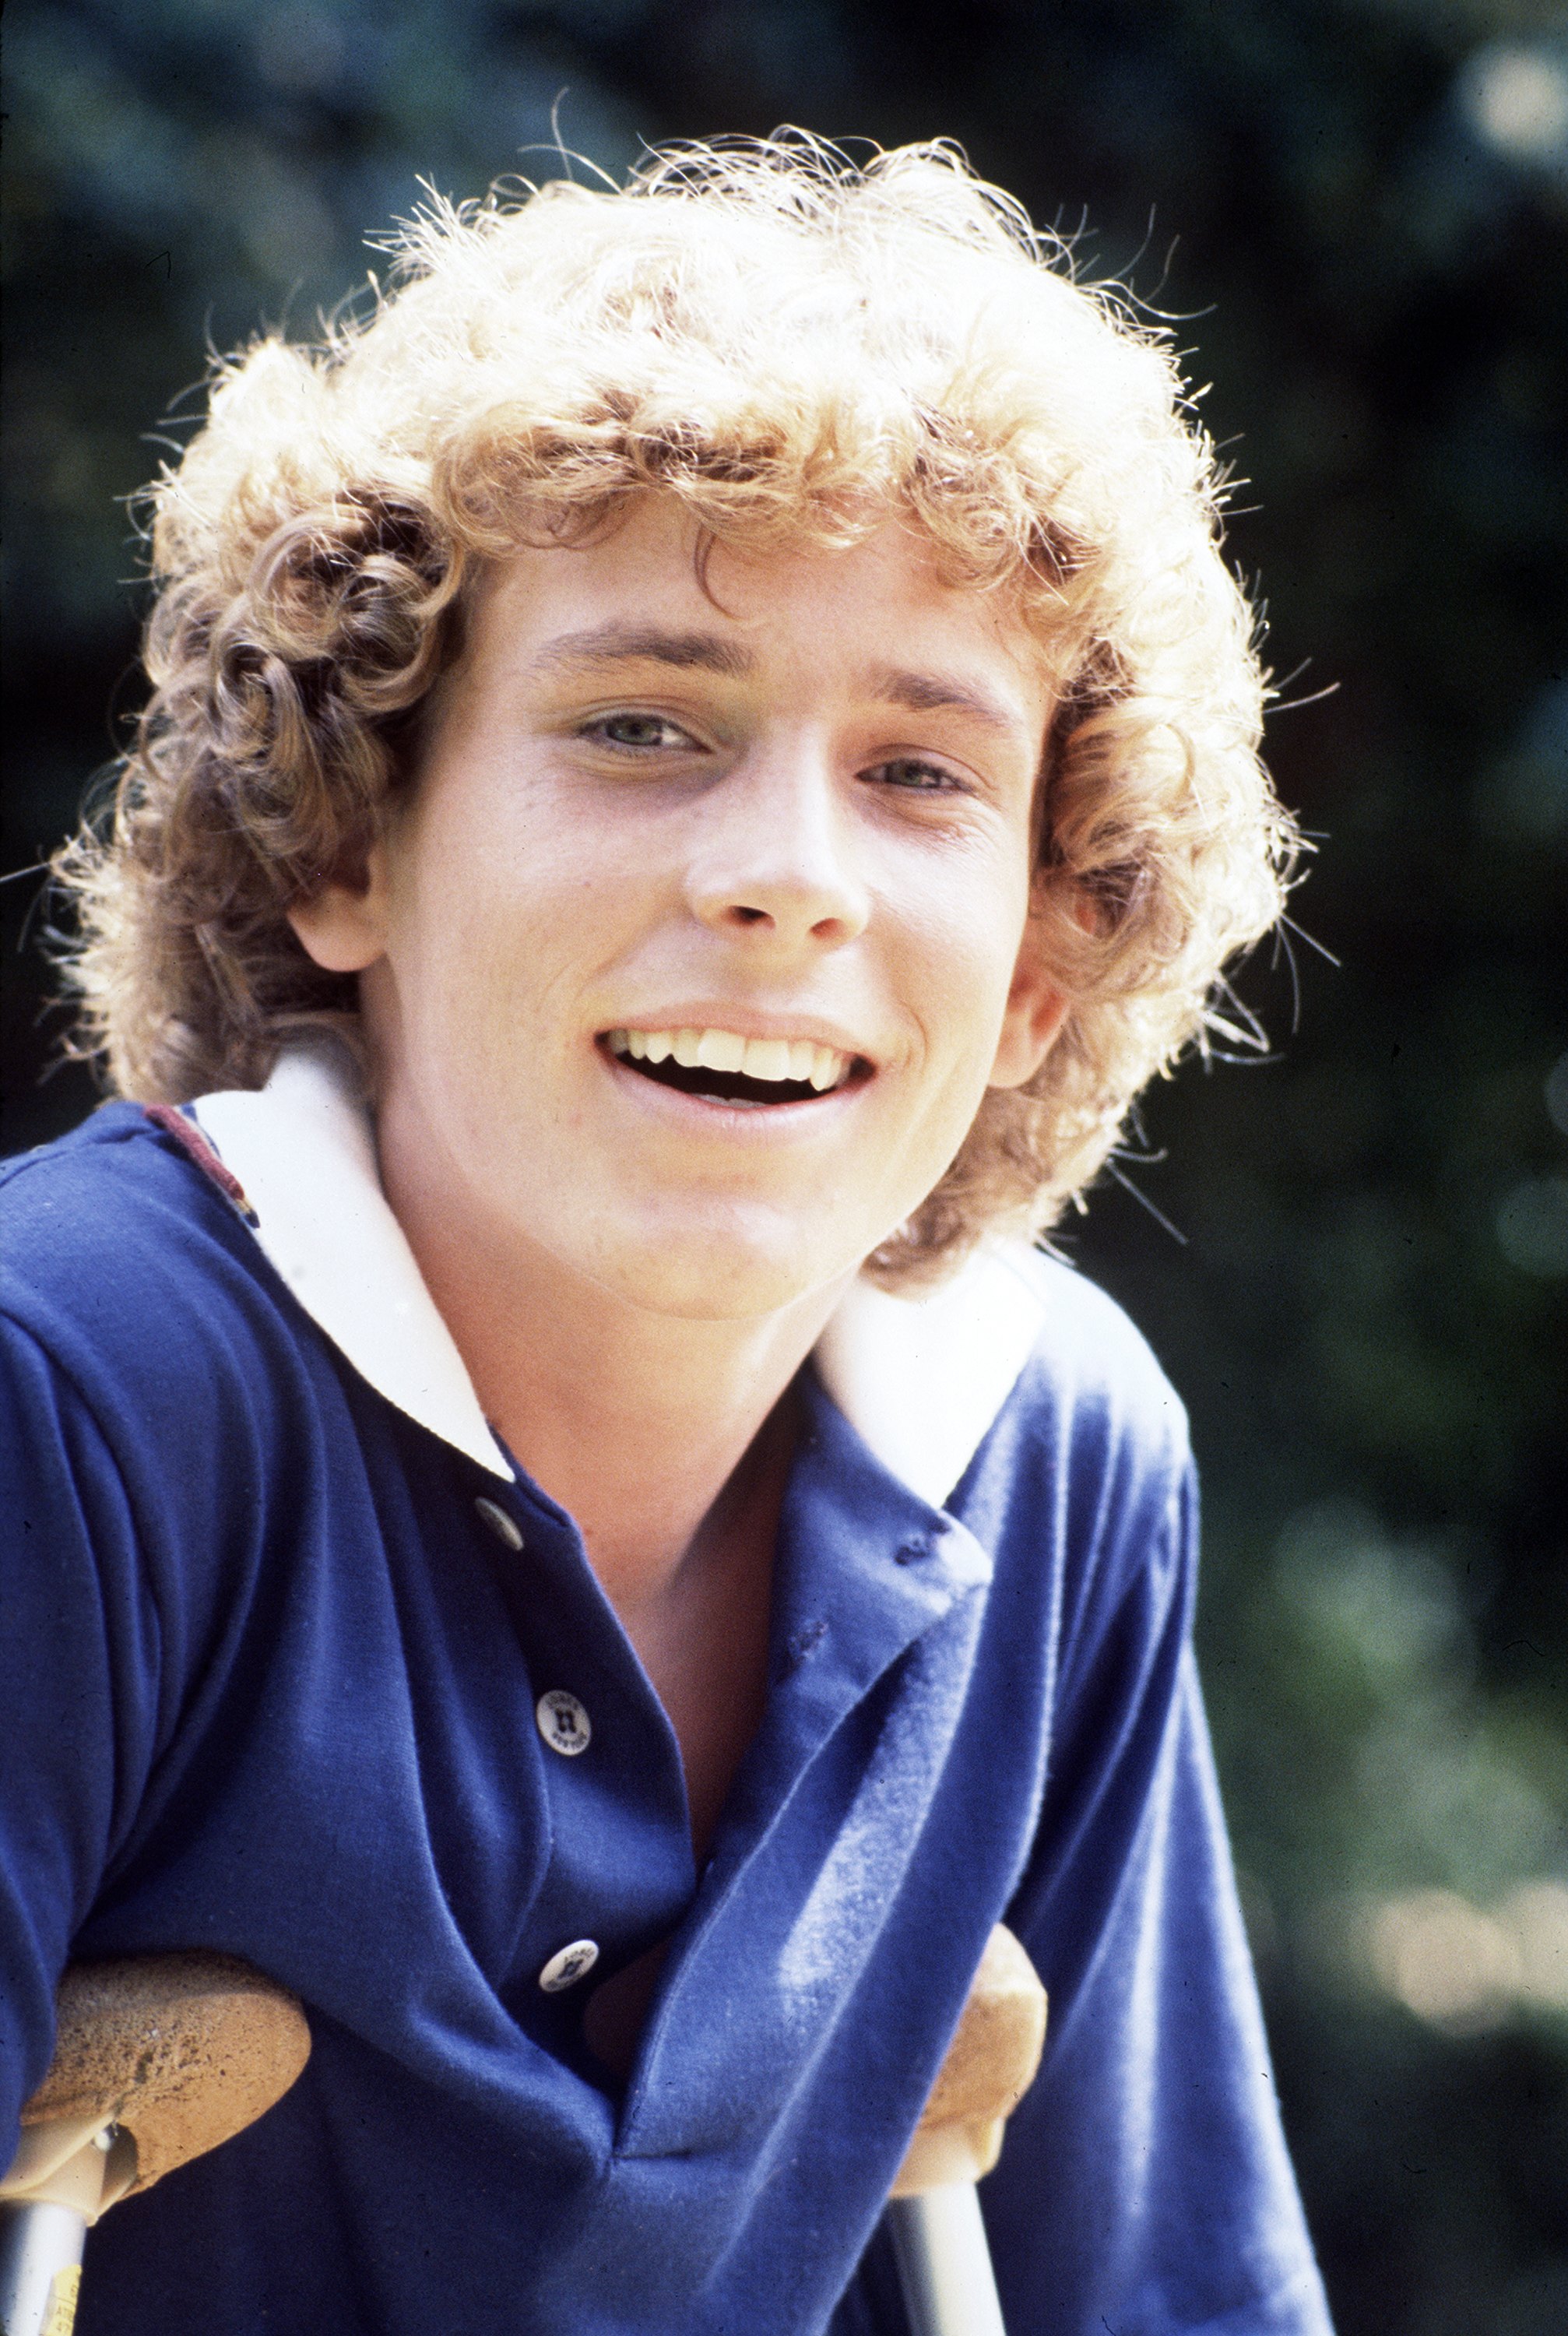 Willie Aames as Tommy on "Eight is Enough" circa September 1977 | Source: Getty Images